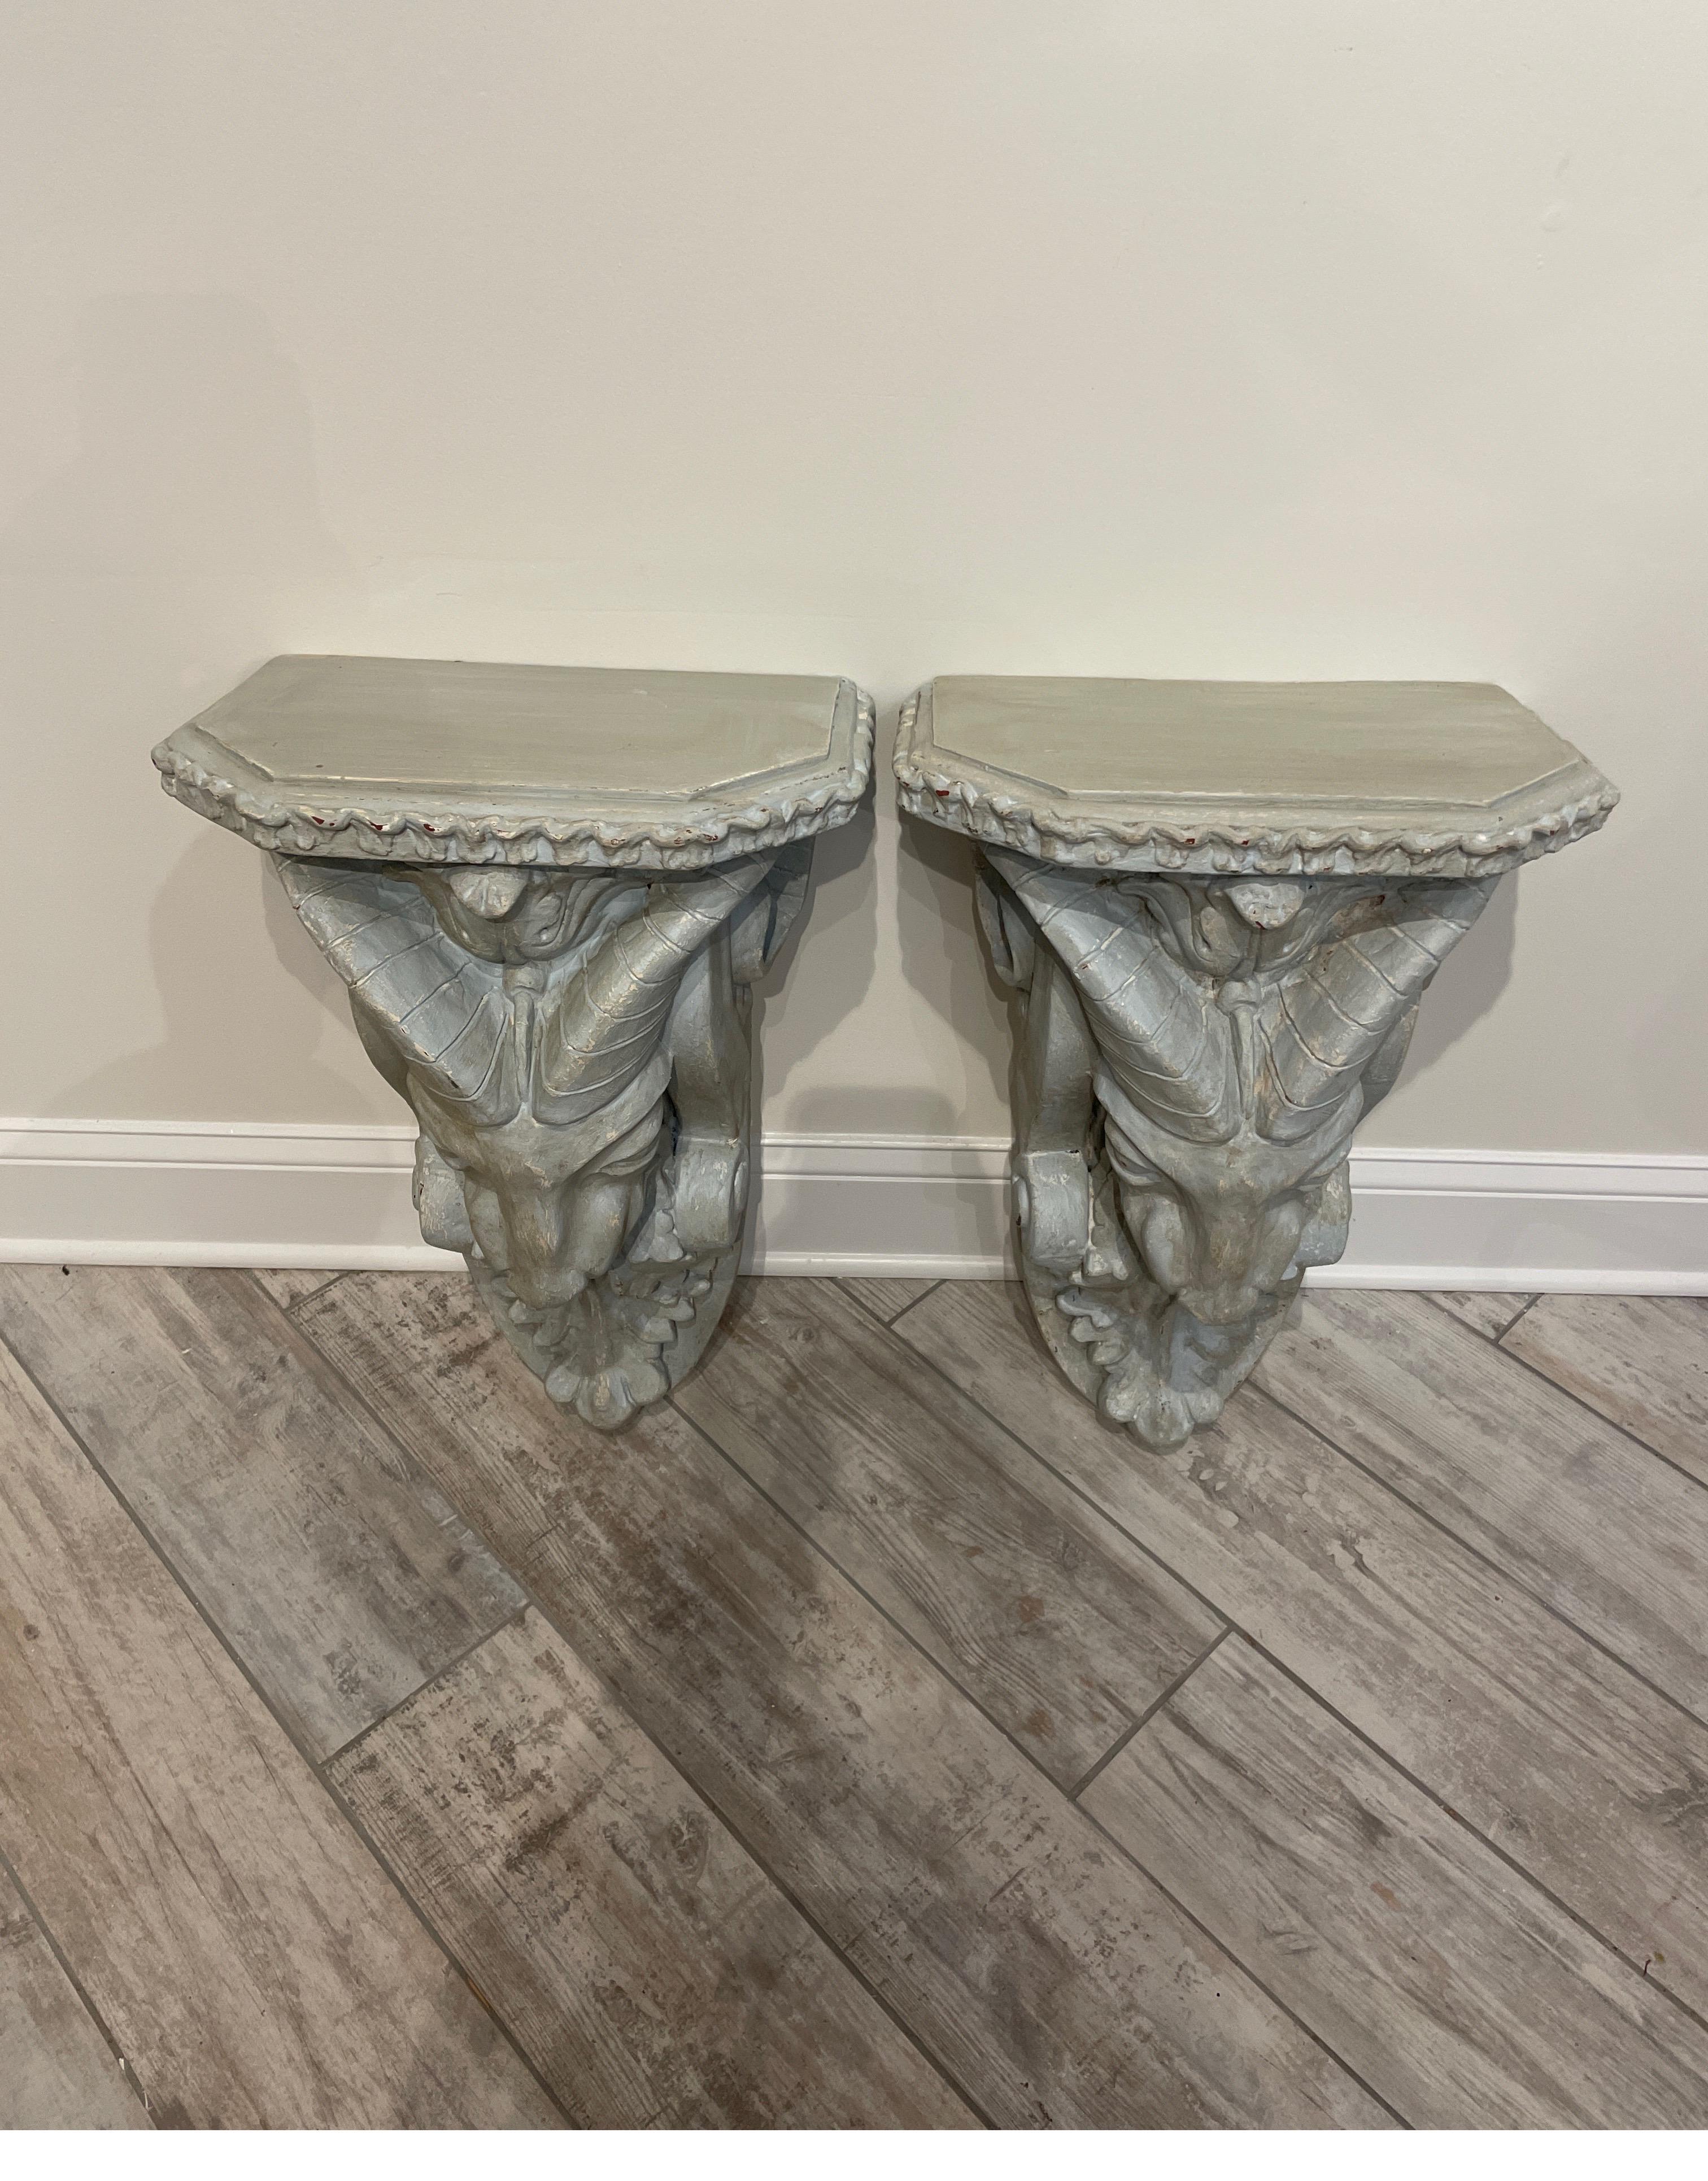 Vintage pair of large molded rams head wall brackets finished in a beautiful pale blue / grey hue. Very nice detail.